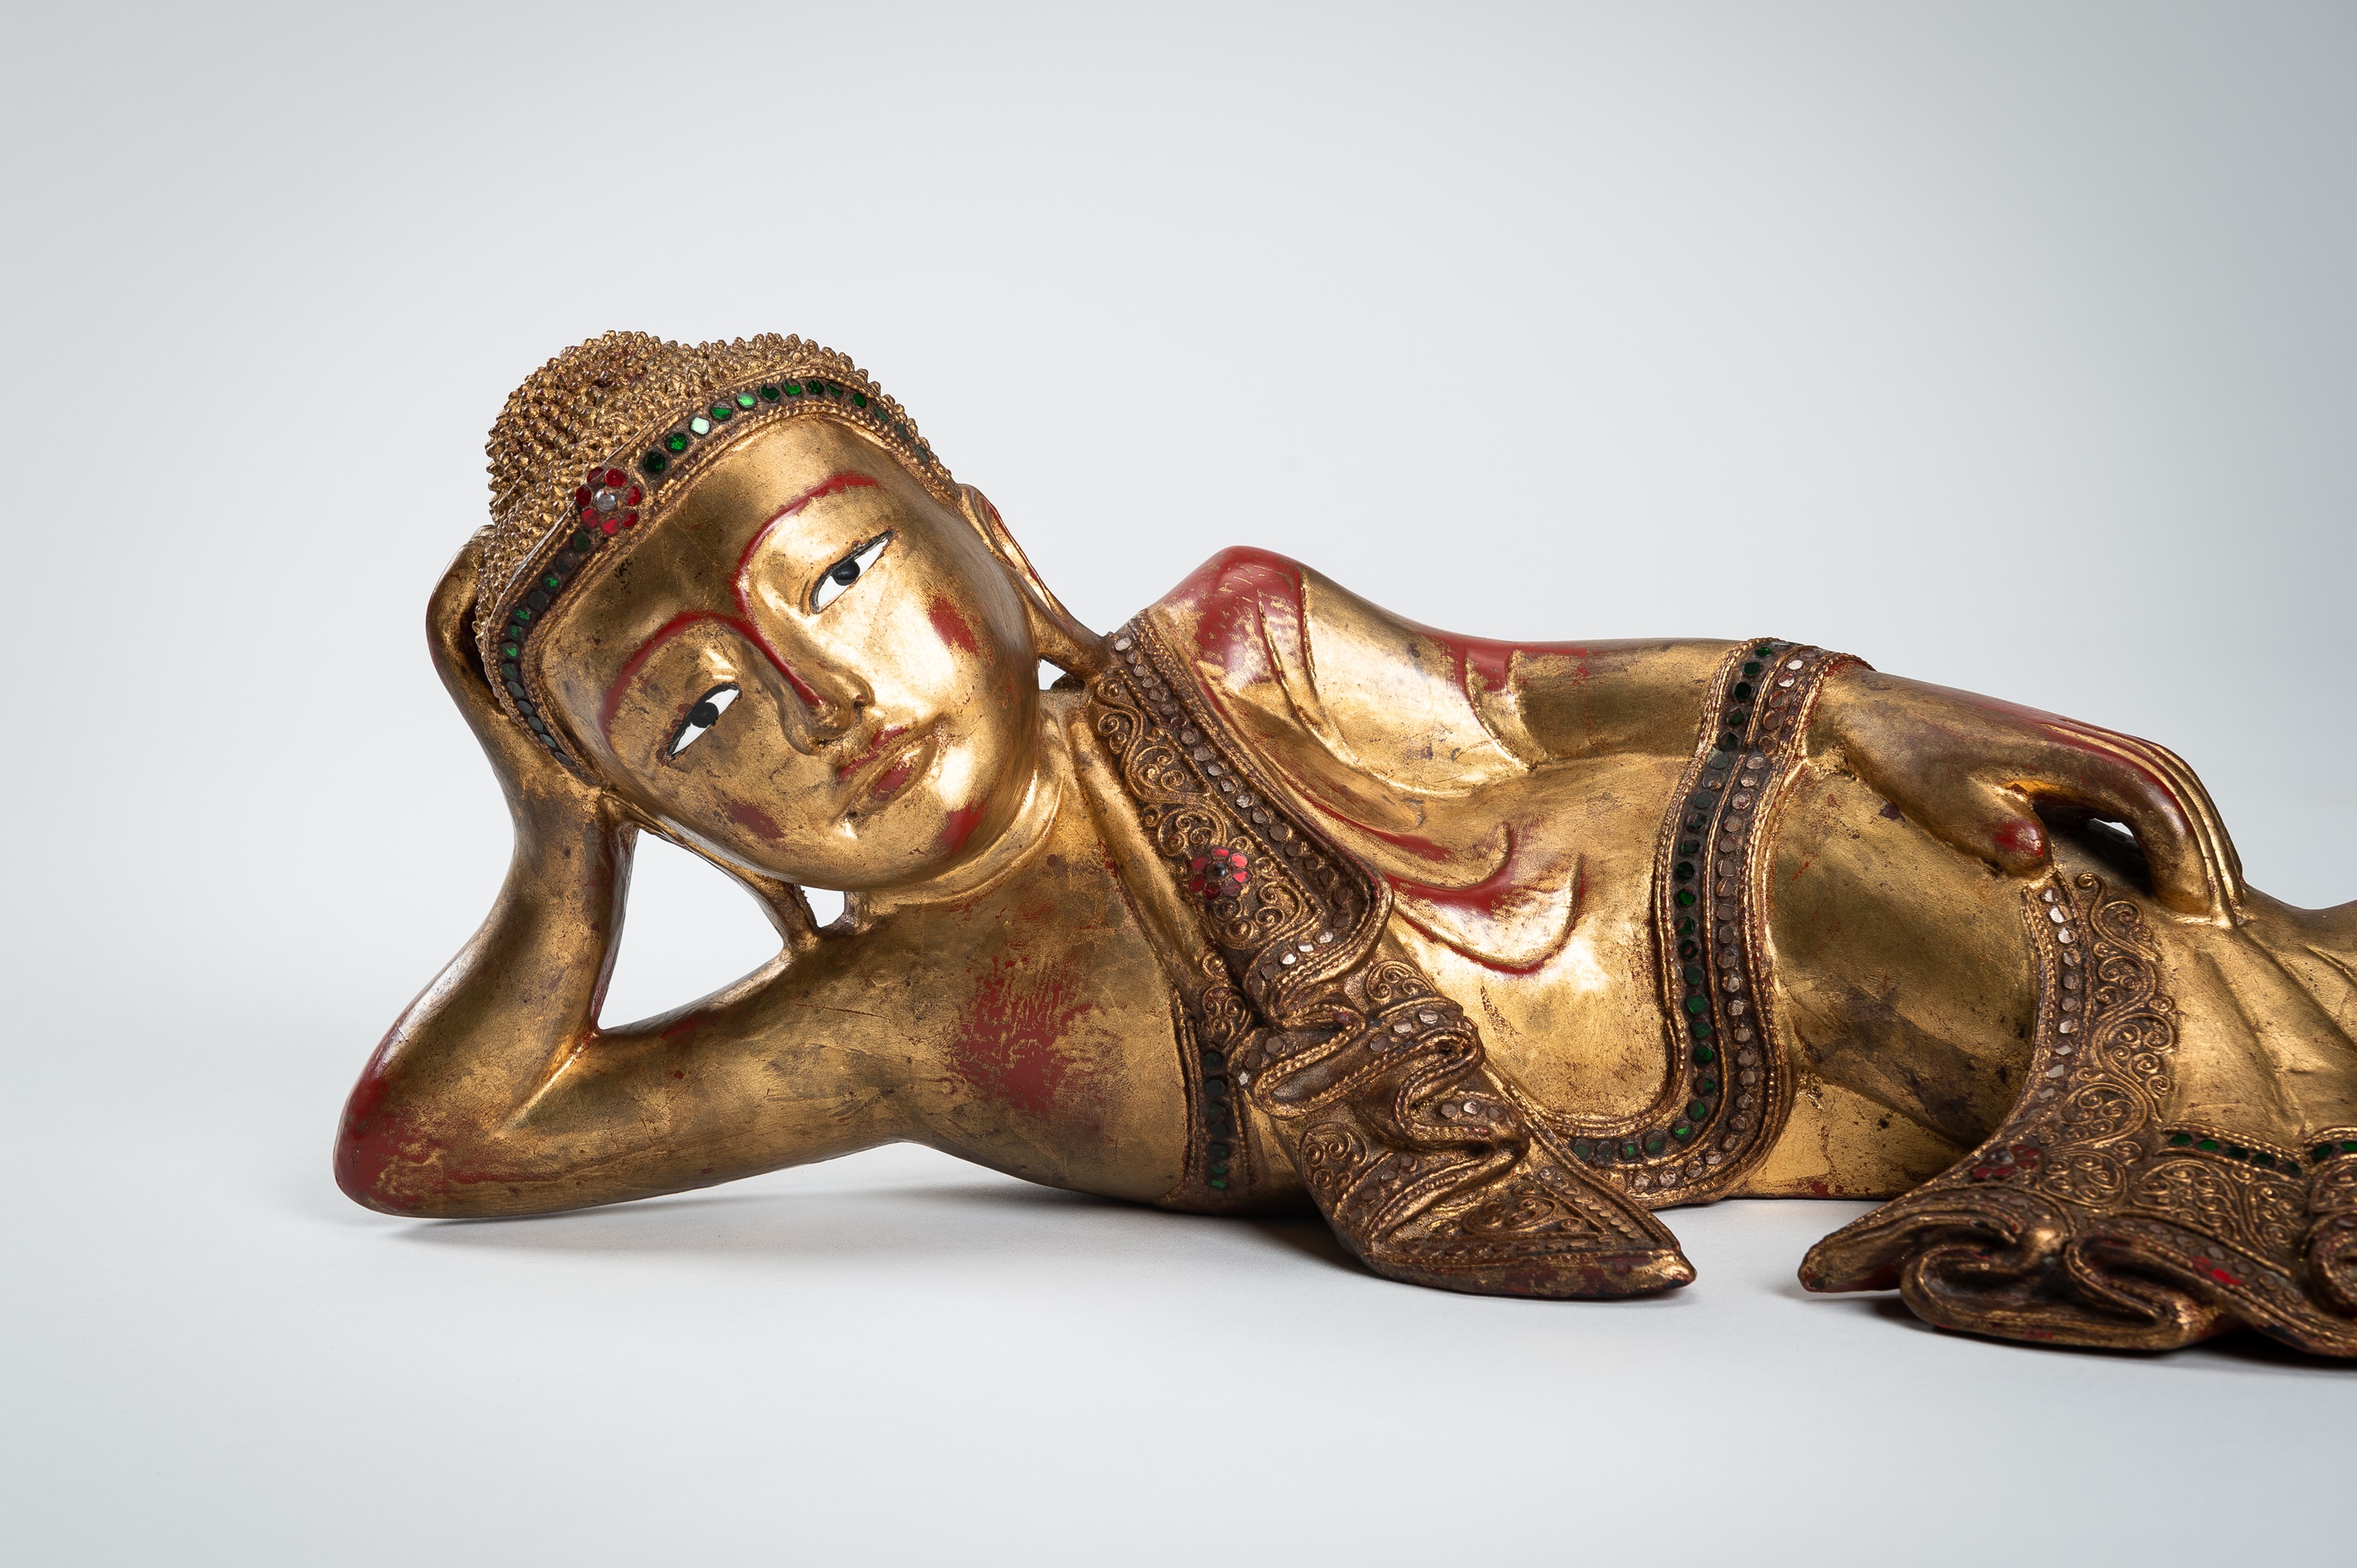 A BURMESE GILT-LACQUERED WOOD FIGURE OF THE RECLINING BUDDHA - Image 2 of 13